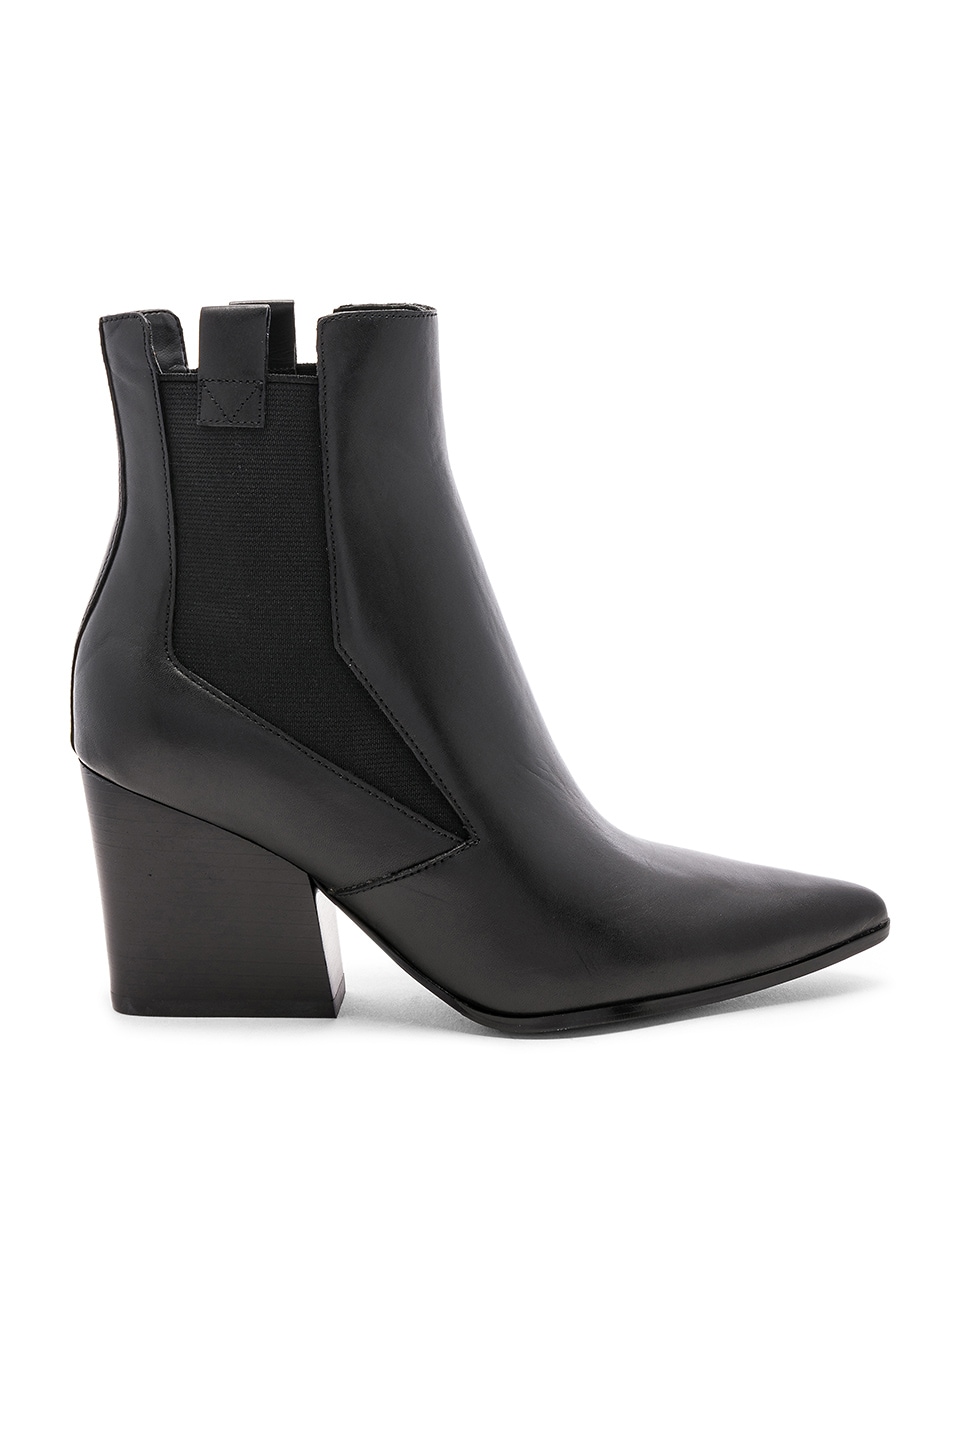 KENDALL + KYLIE Finigan Bootie in Black Leather | REVOLVE